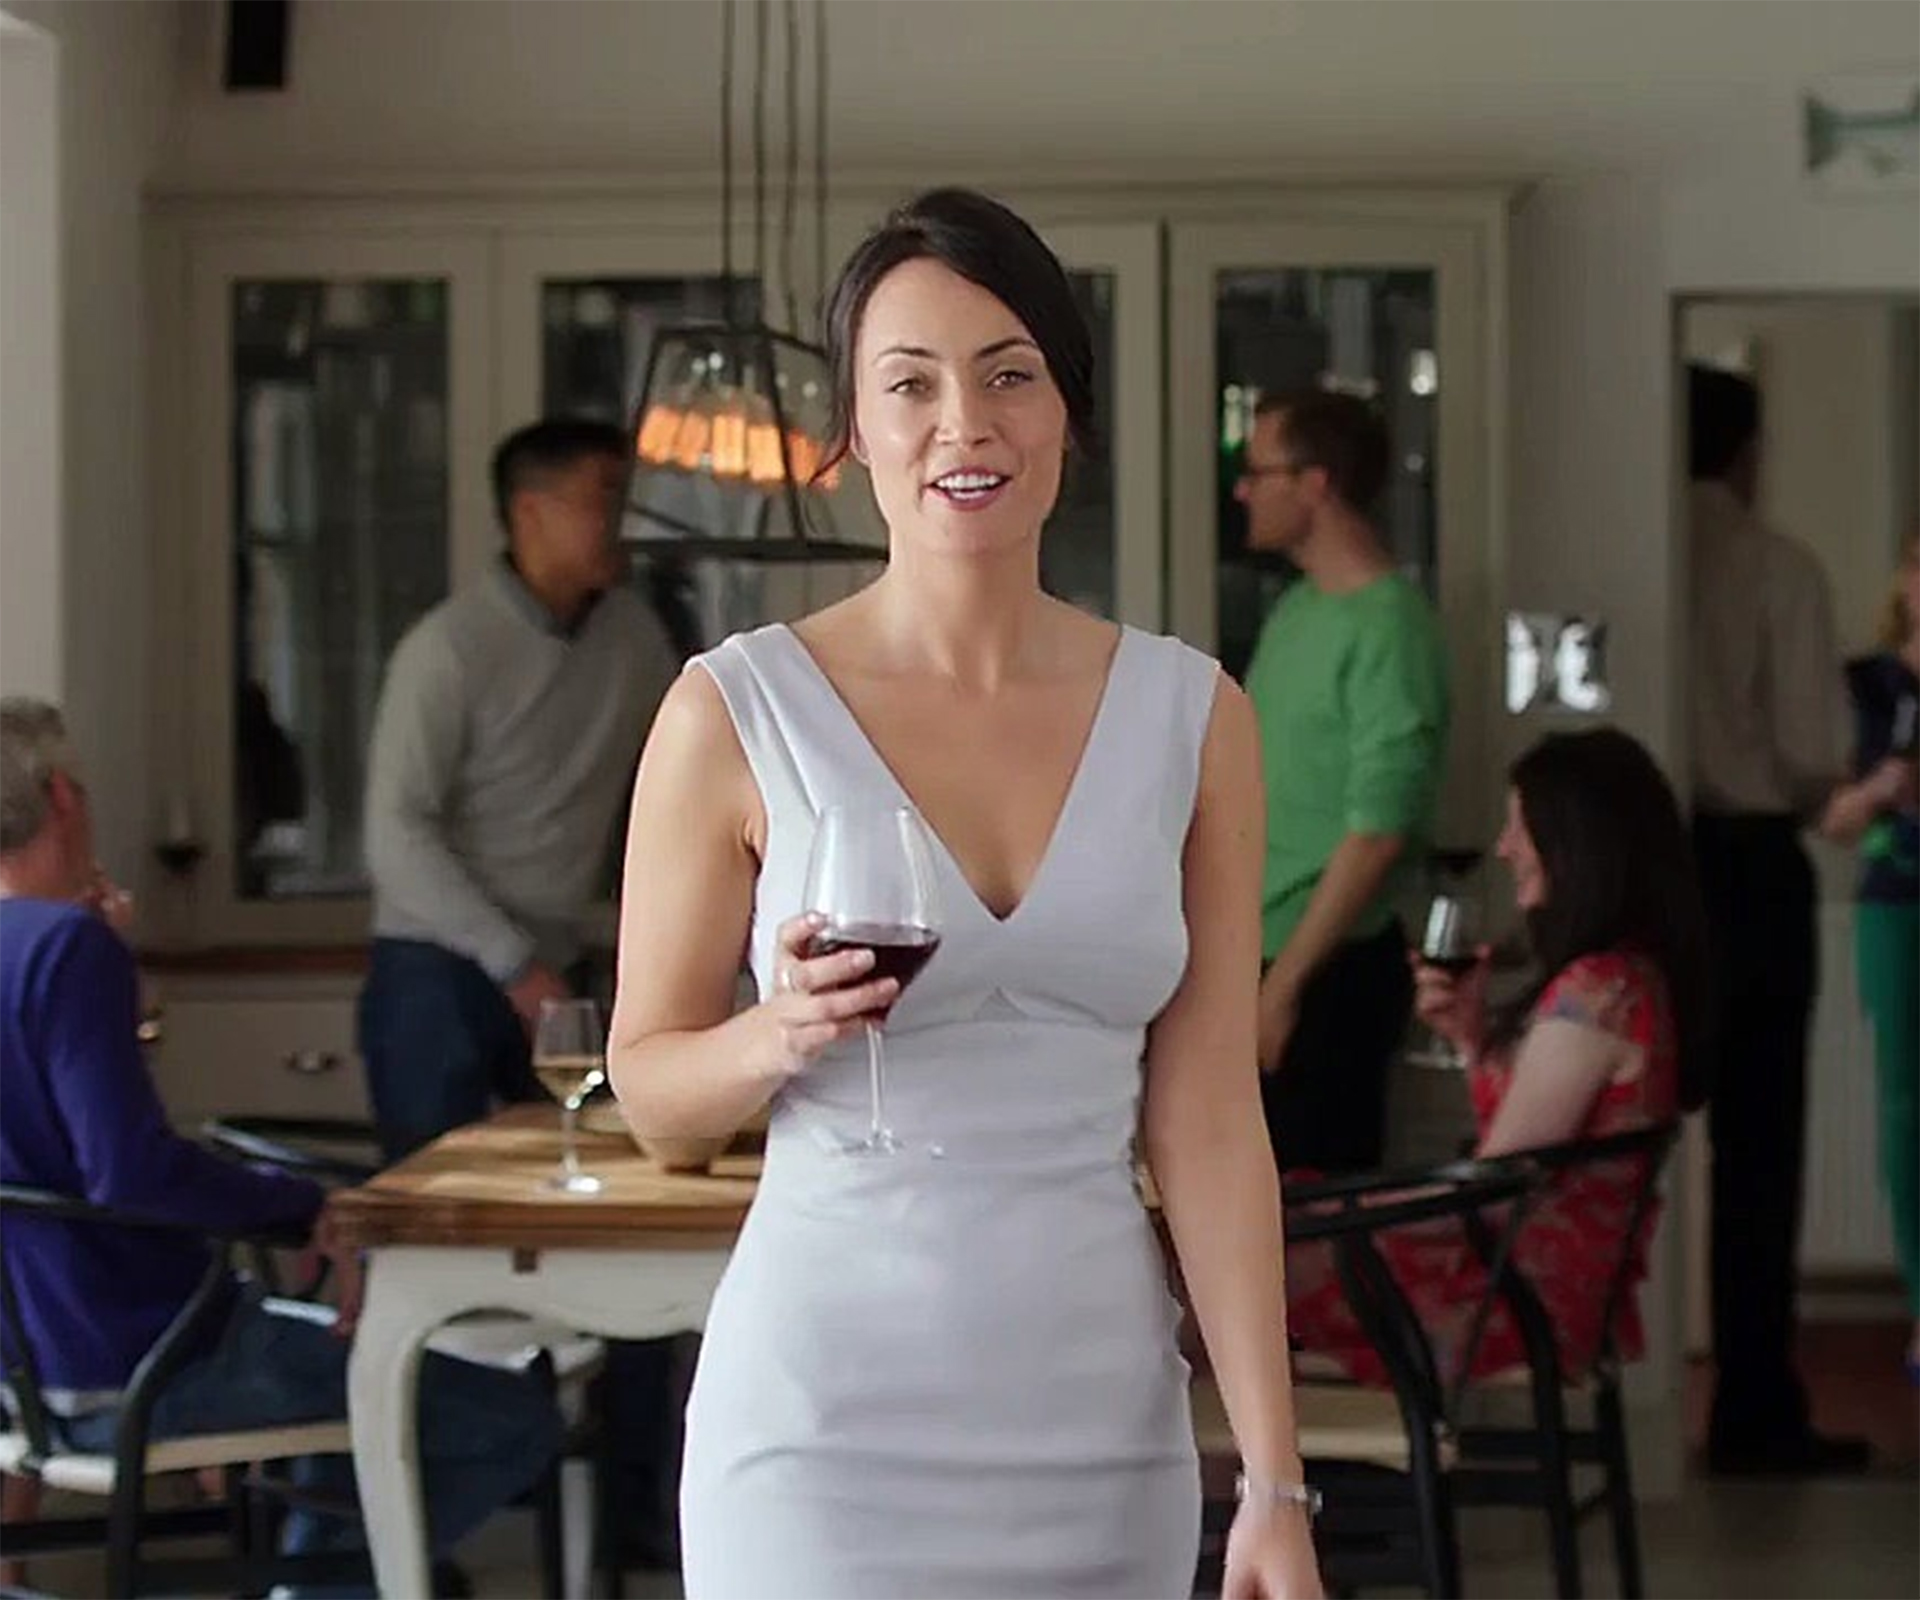 Australia’s naughty wine commercial pulled from UK air